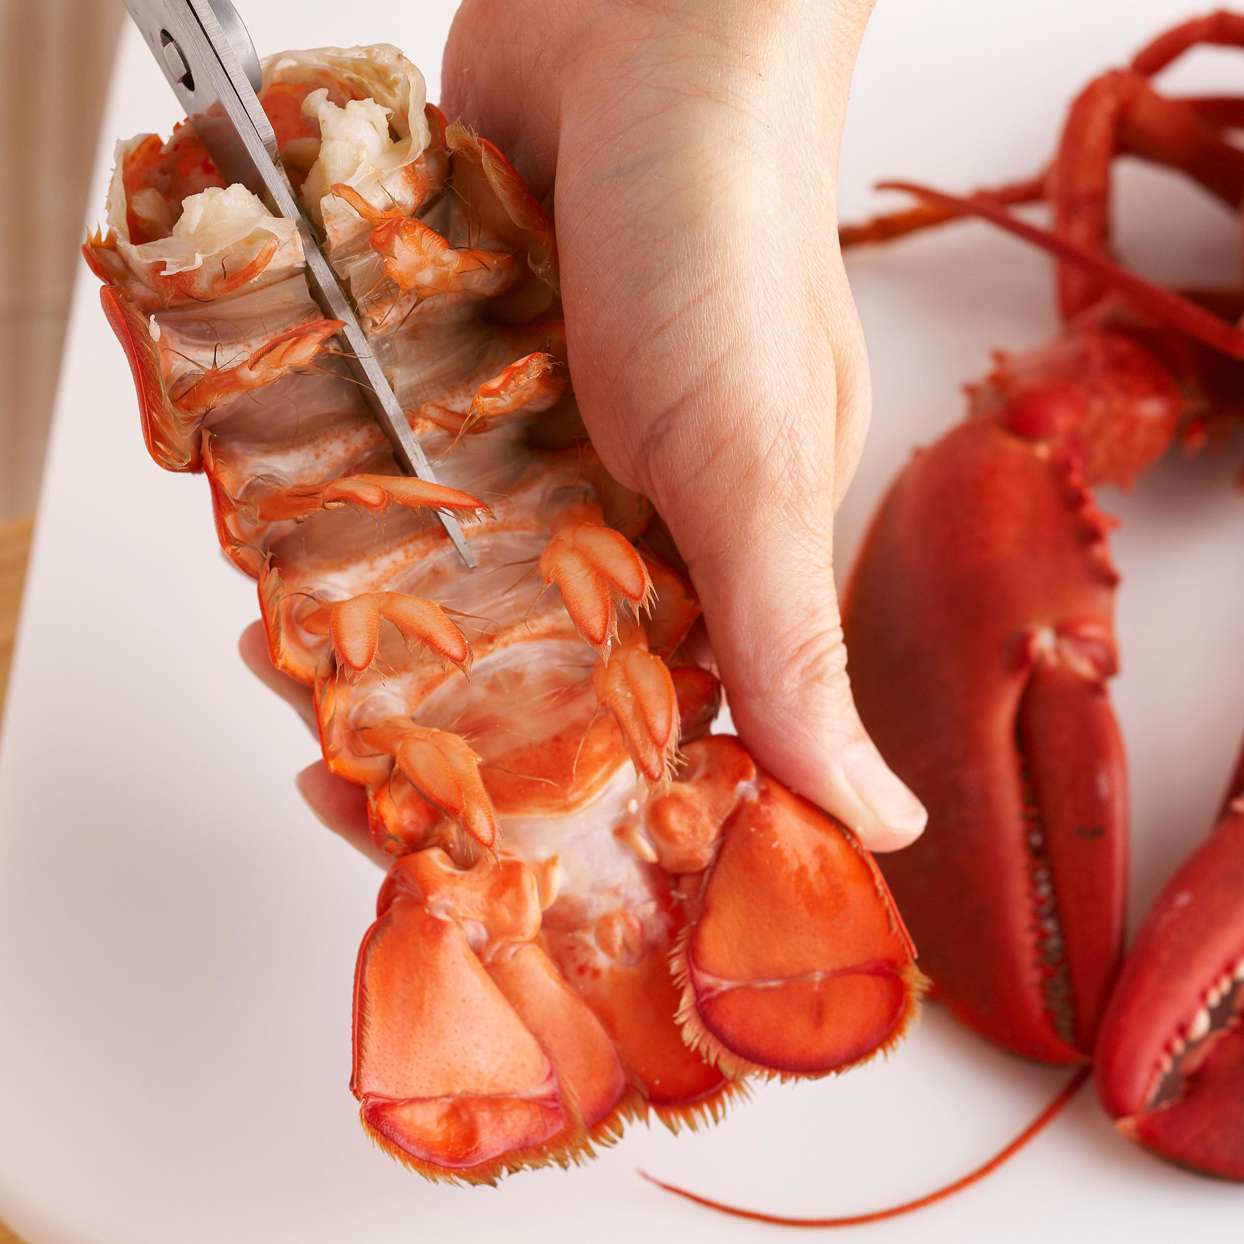 How to Cook Lobster Fit for a Fancy Dinner Celebration Better Homes